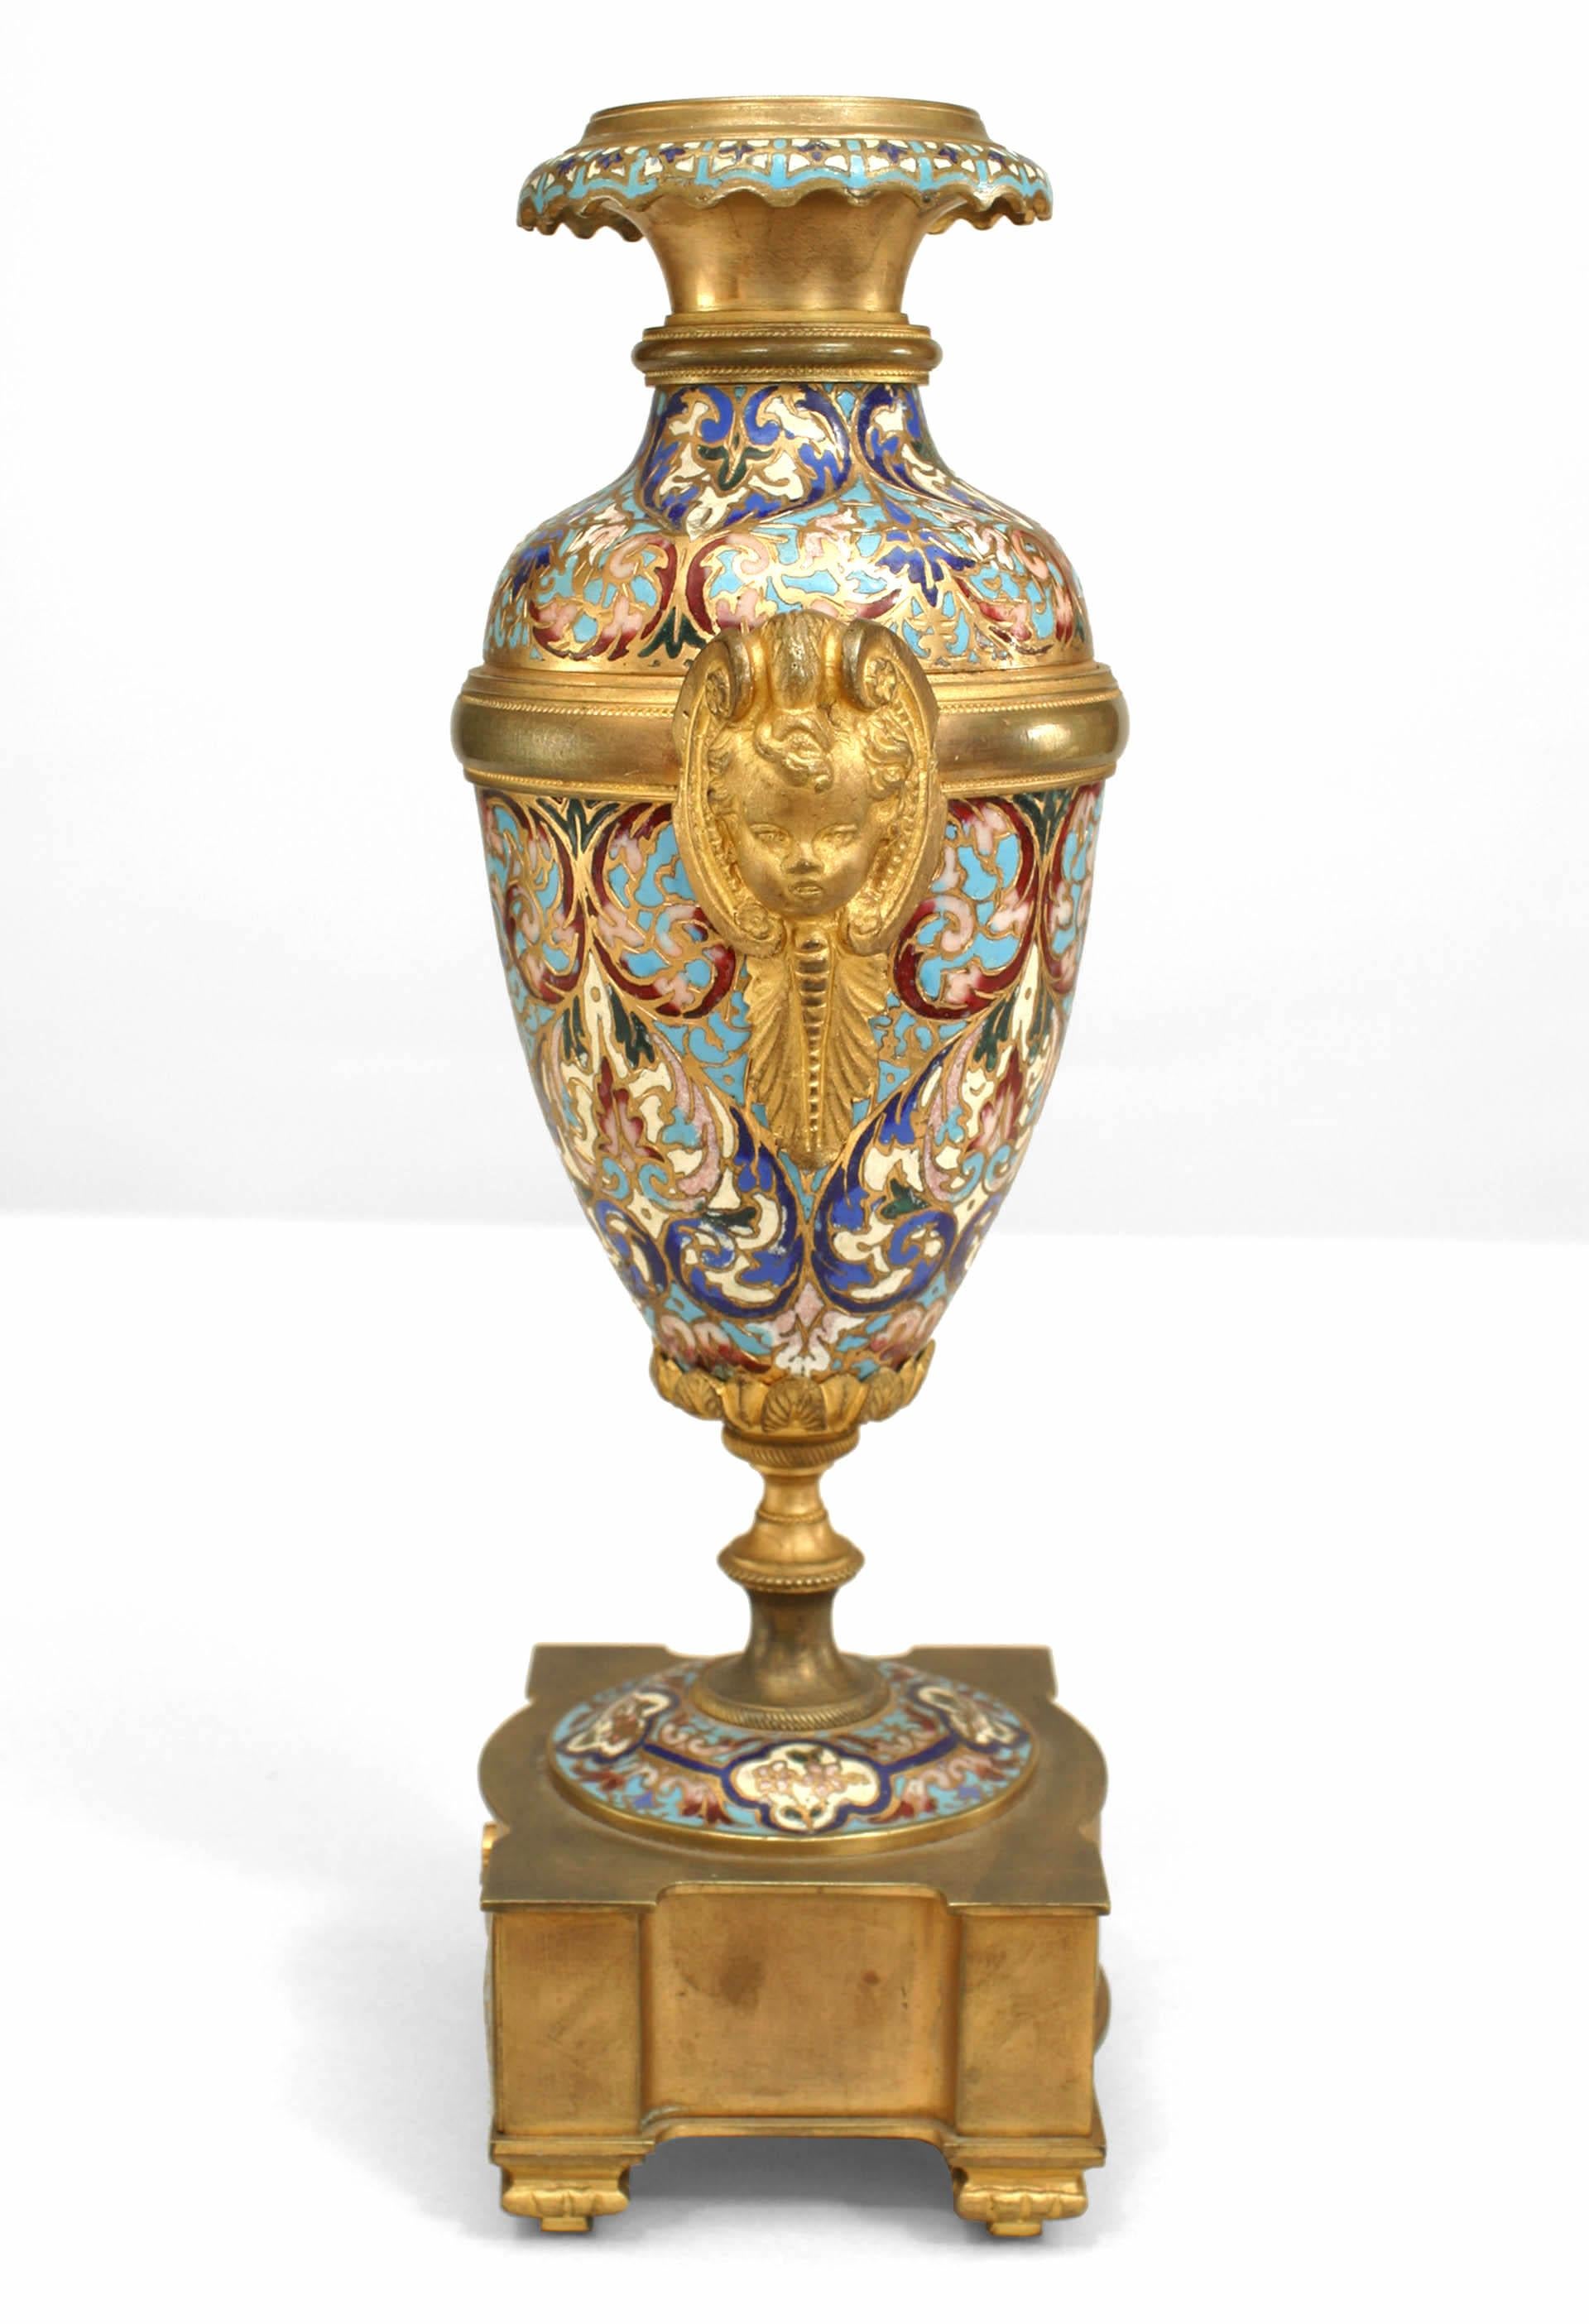 19th Century Pair of French Victorian Enamel and Gilt Bronze Urn Vases